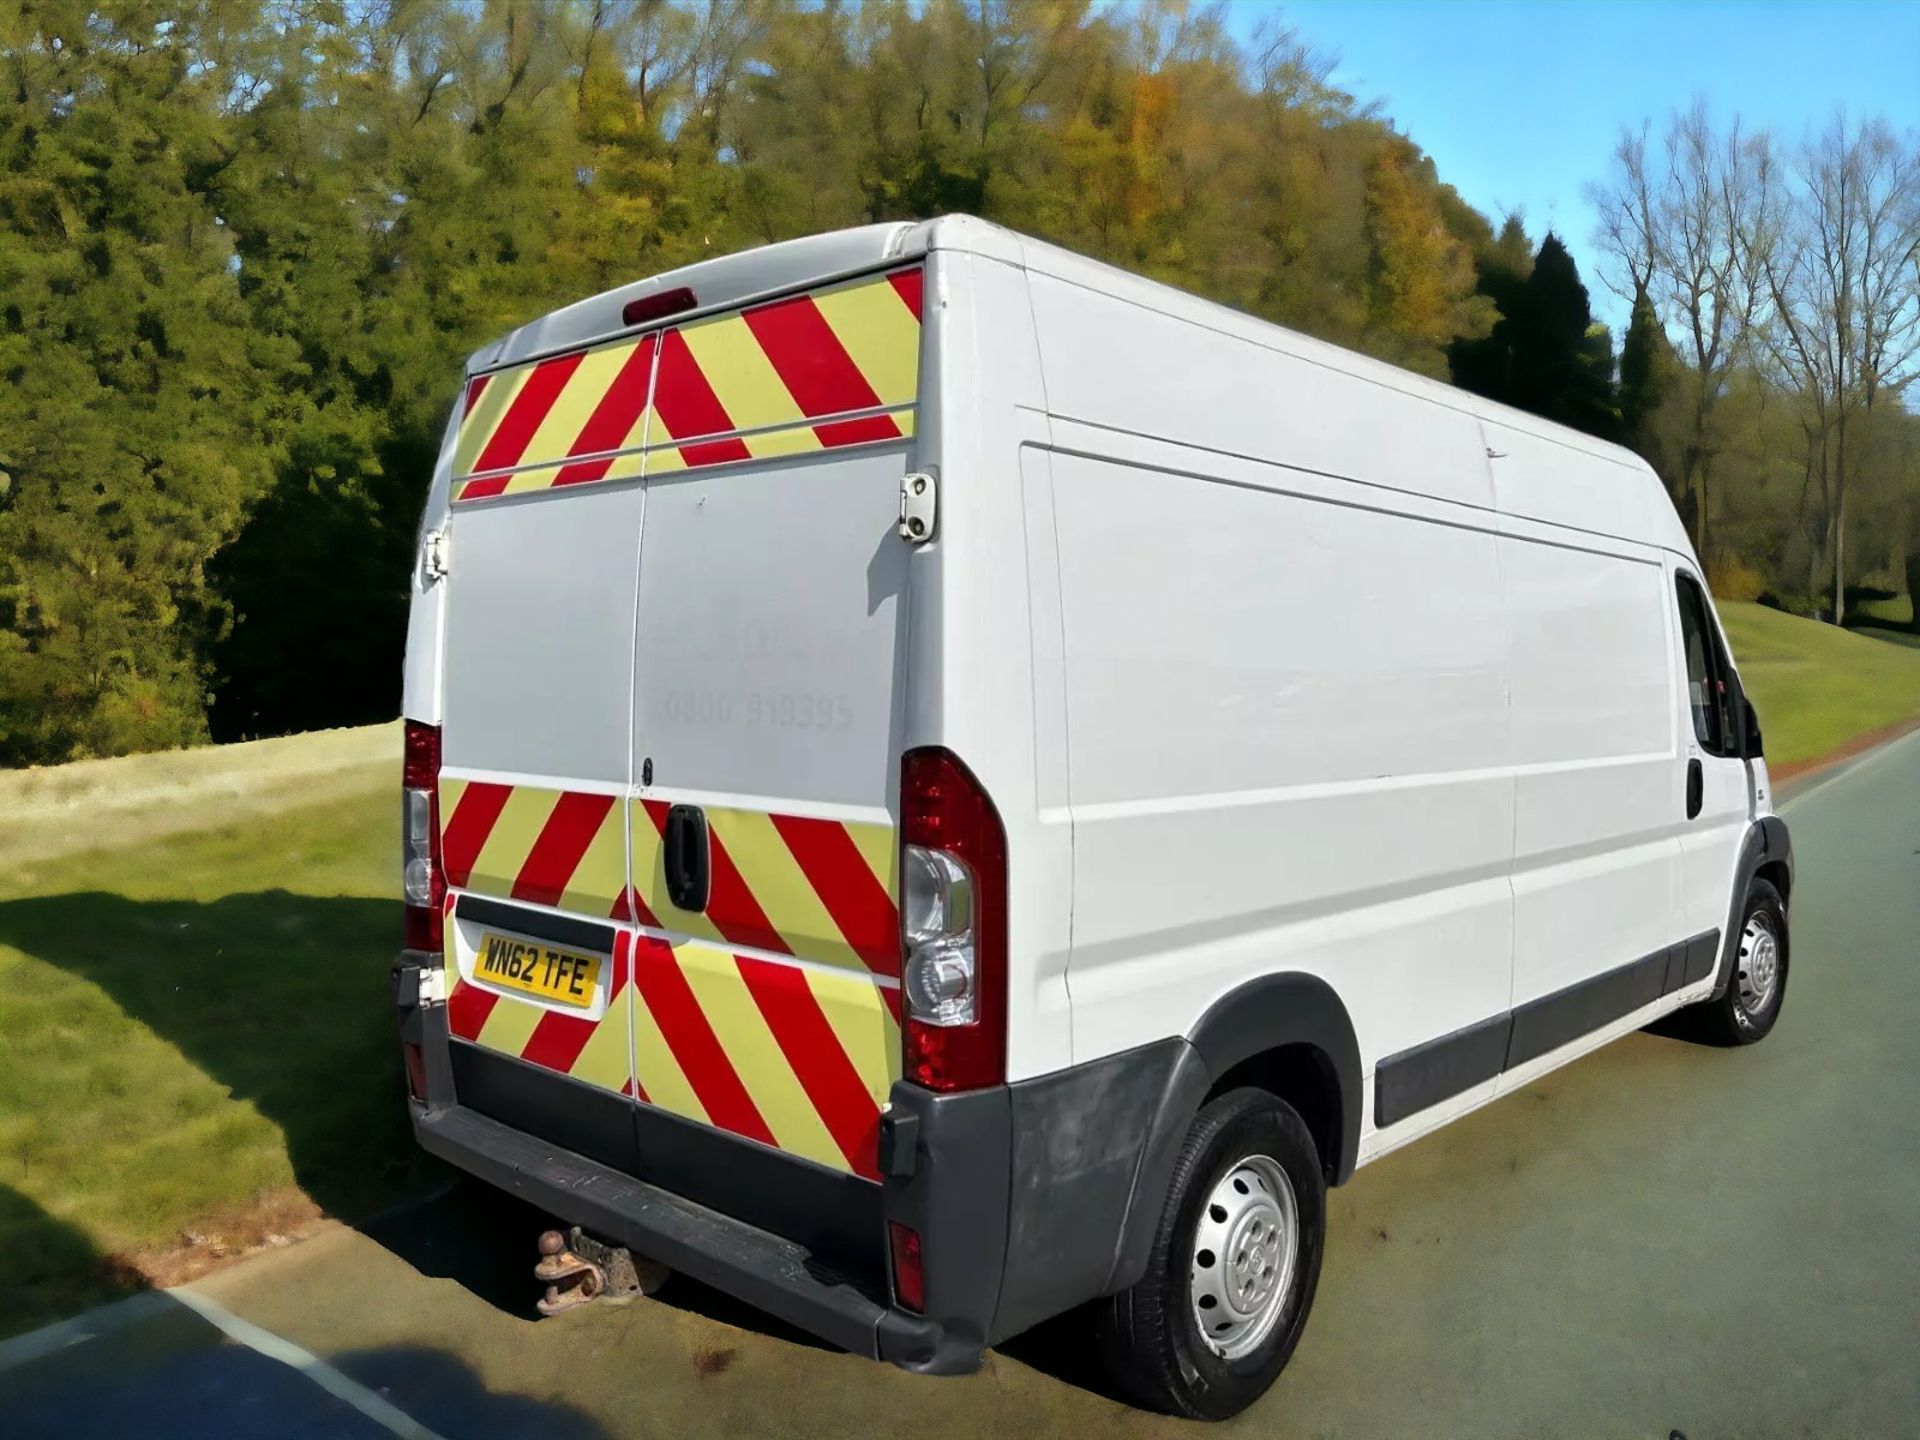 2013 FIAT DUCATO 35 MULTI JET LWB L3H2 - HPI CLEAR - READY TO GO! - Image 4 of 10